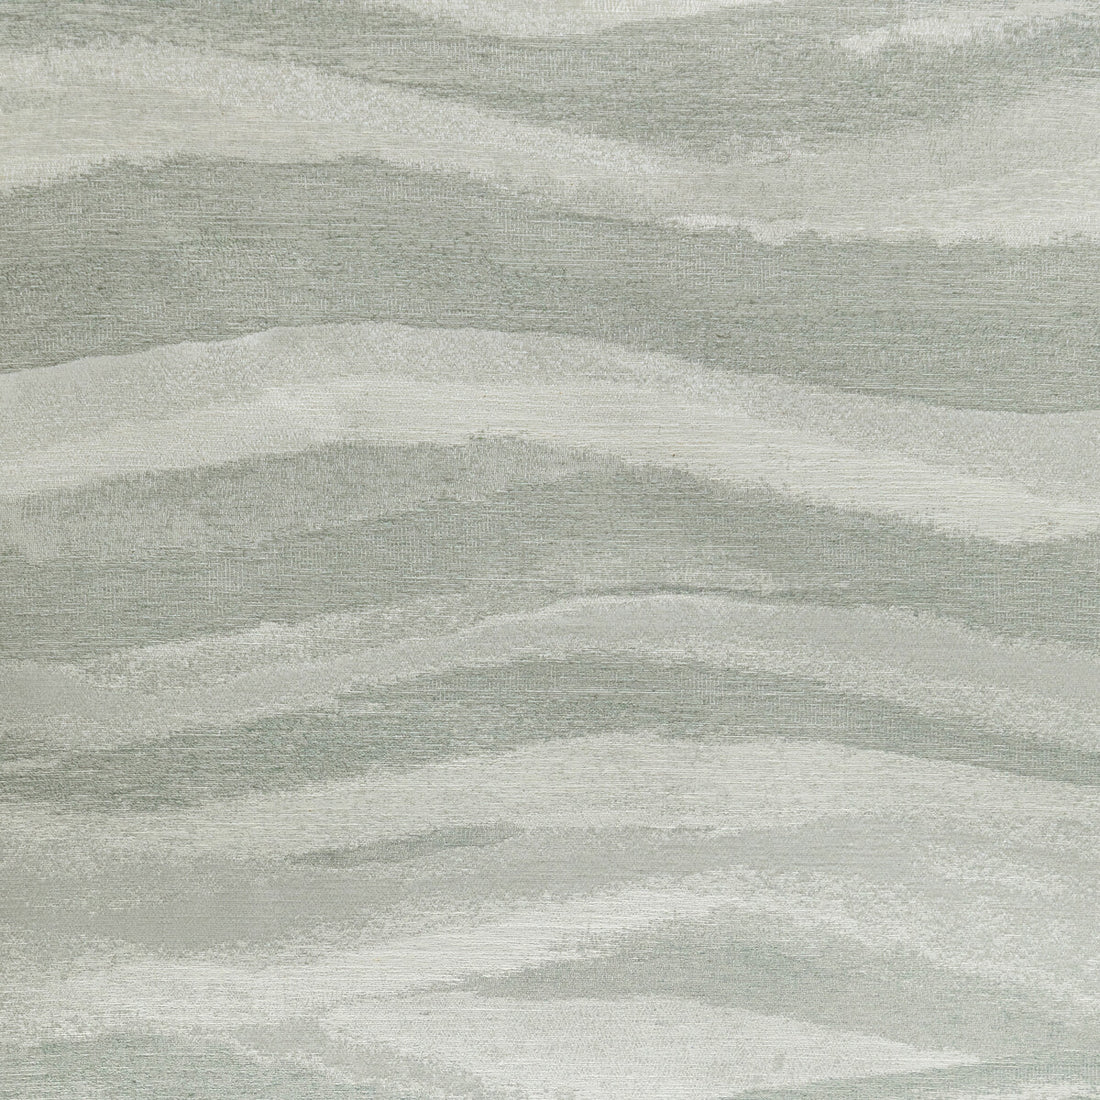 Silk Waves fabric in mist color - pattern 4951.13.0 - by Kravet Couture in the Modern Luxe Silk Luster collection